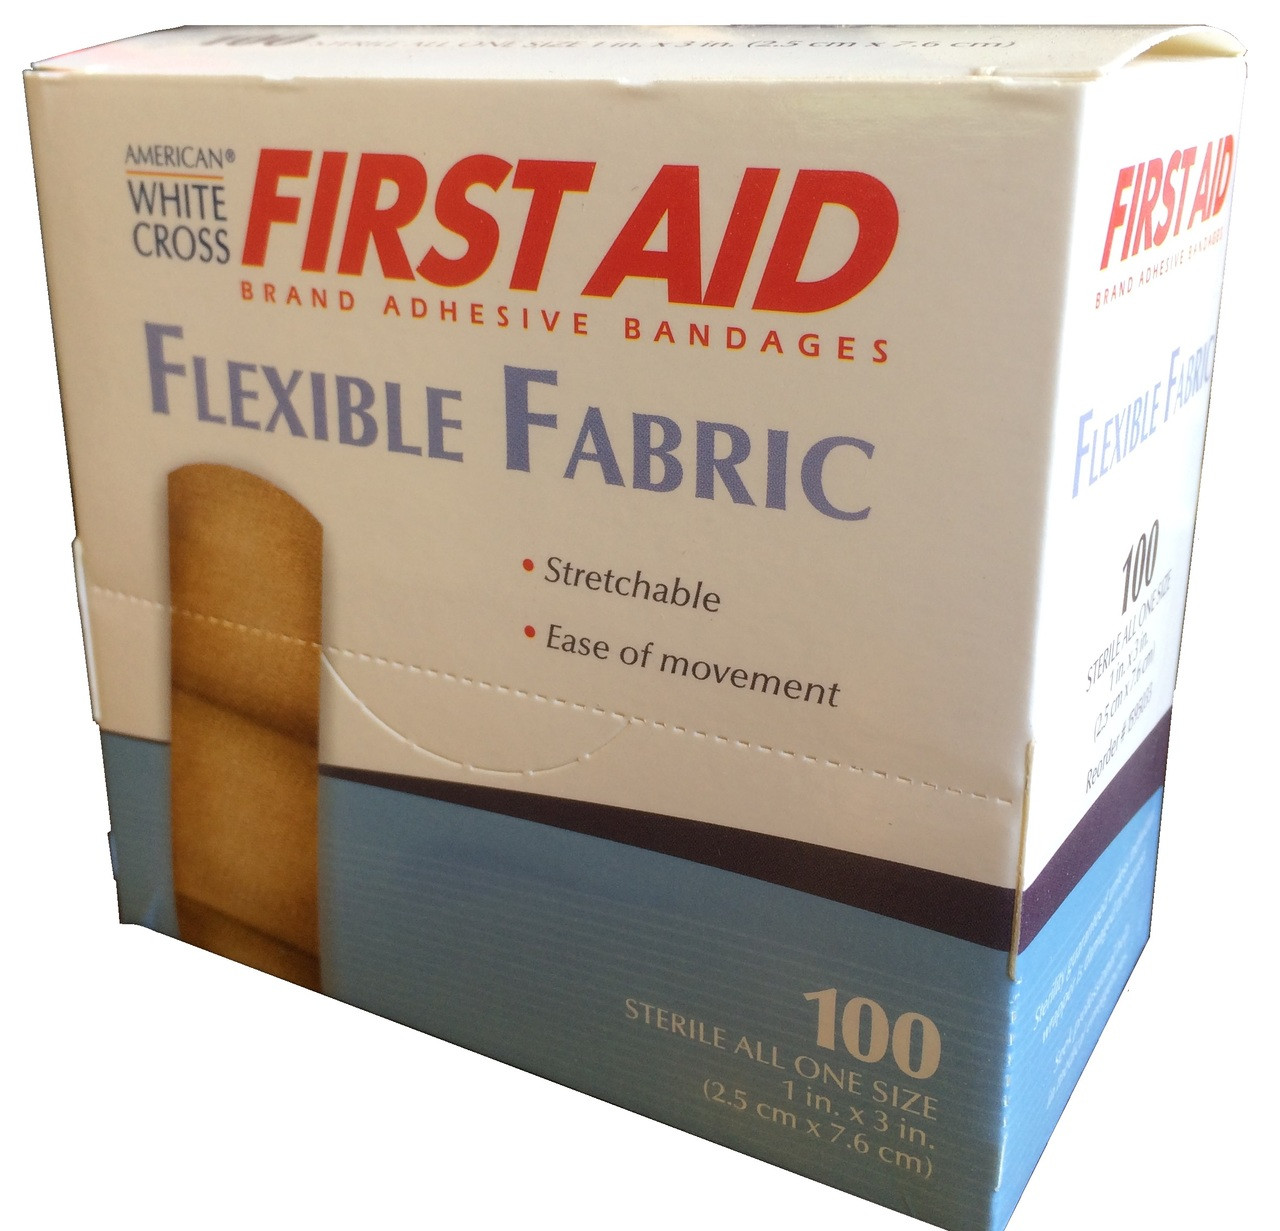 Flexible Fabric Strip Bandage Compare To Coverlet